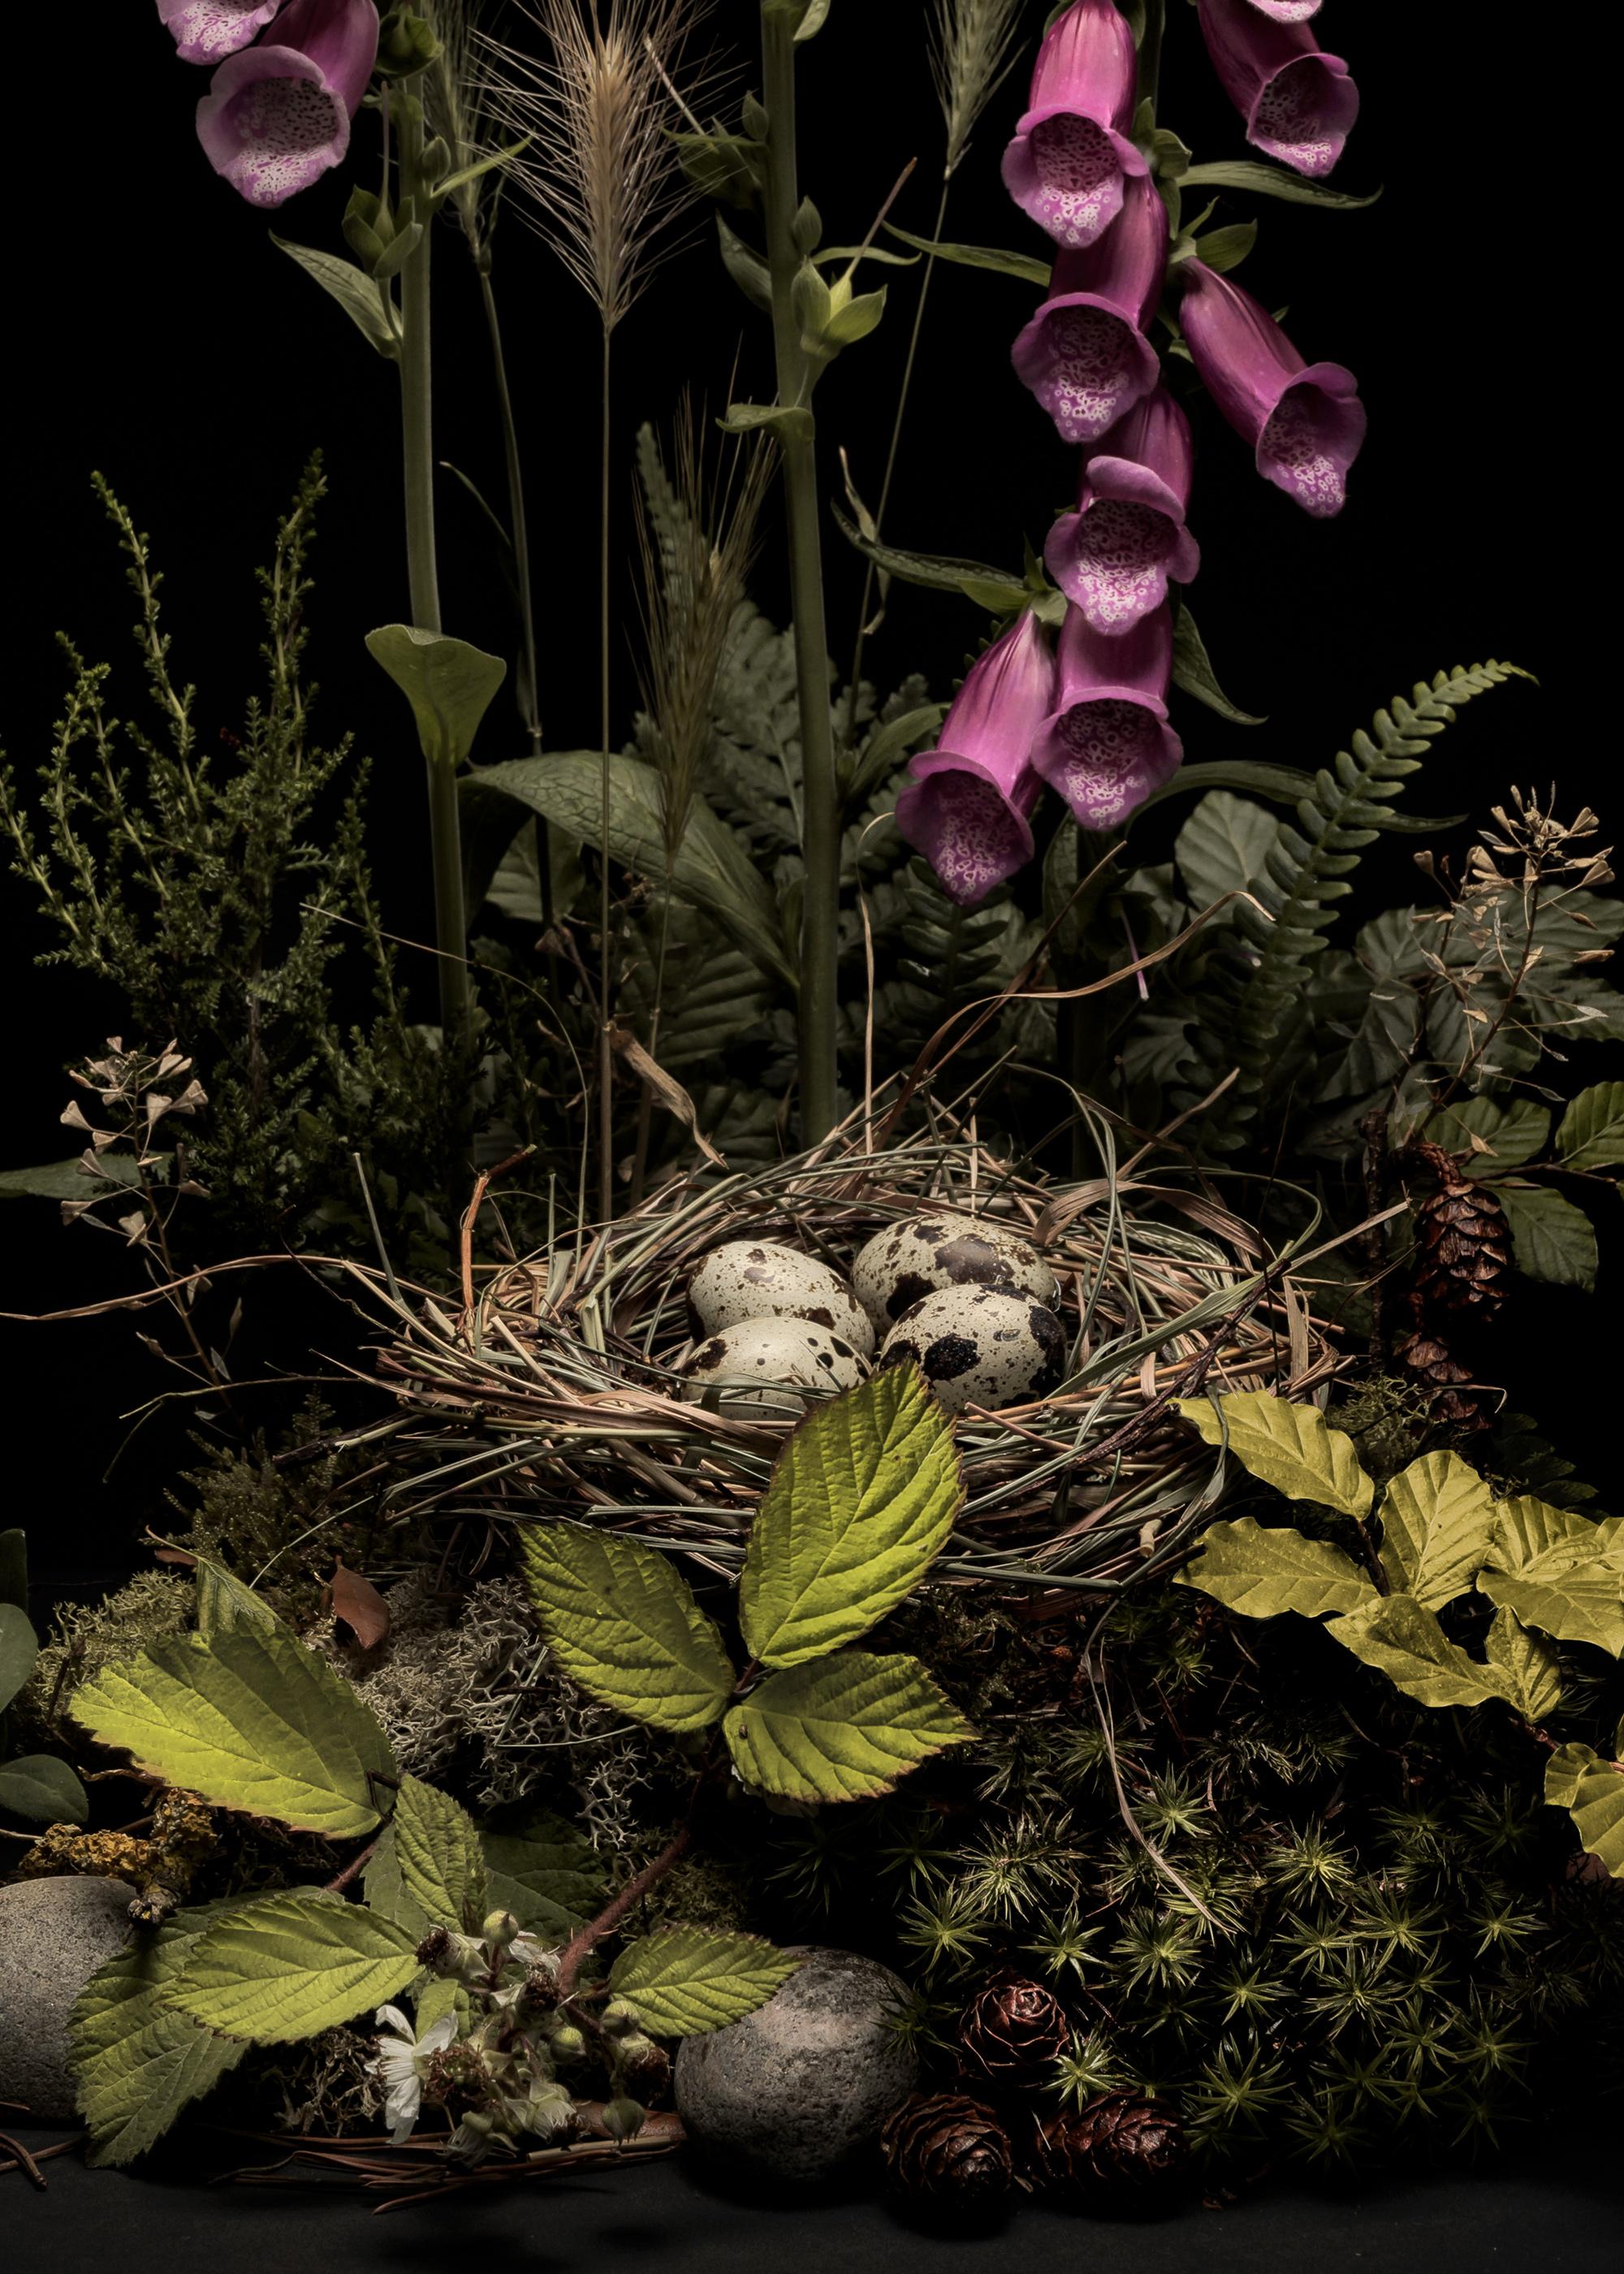 Dar Flora #5, May Foxgloves, A floral arrangement of wild flowers and plants - Photograph by Jasper Goodall